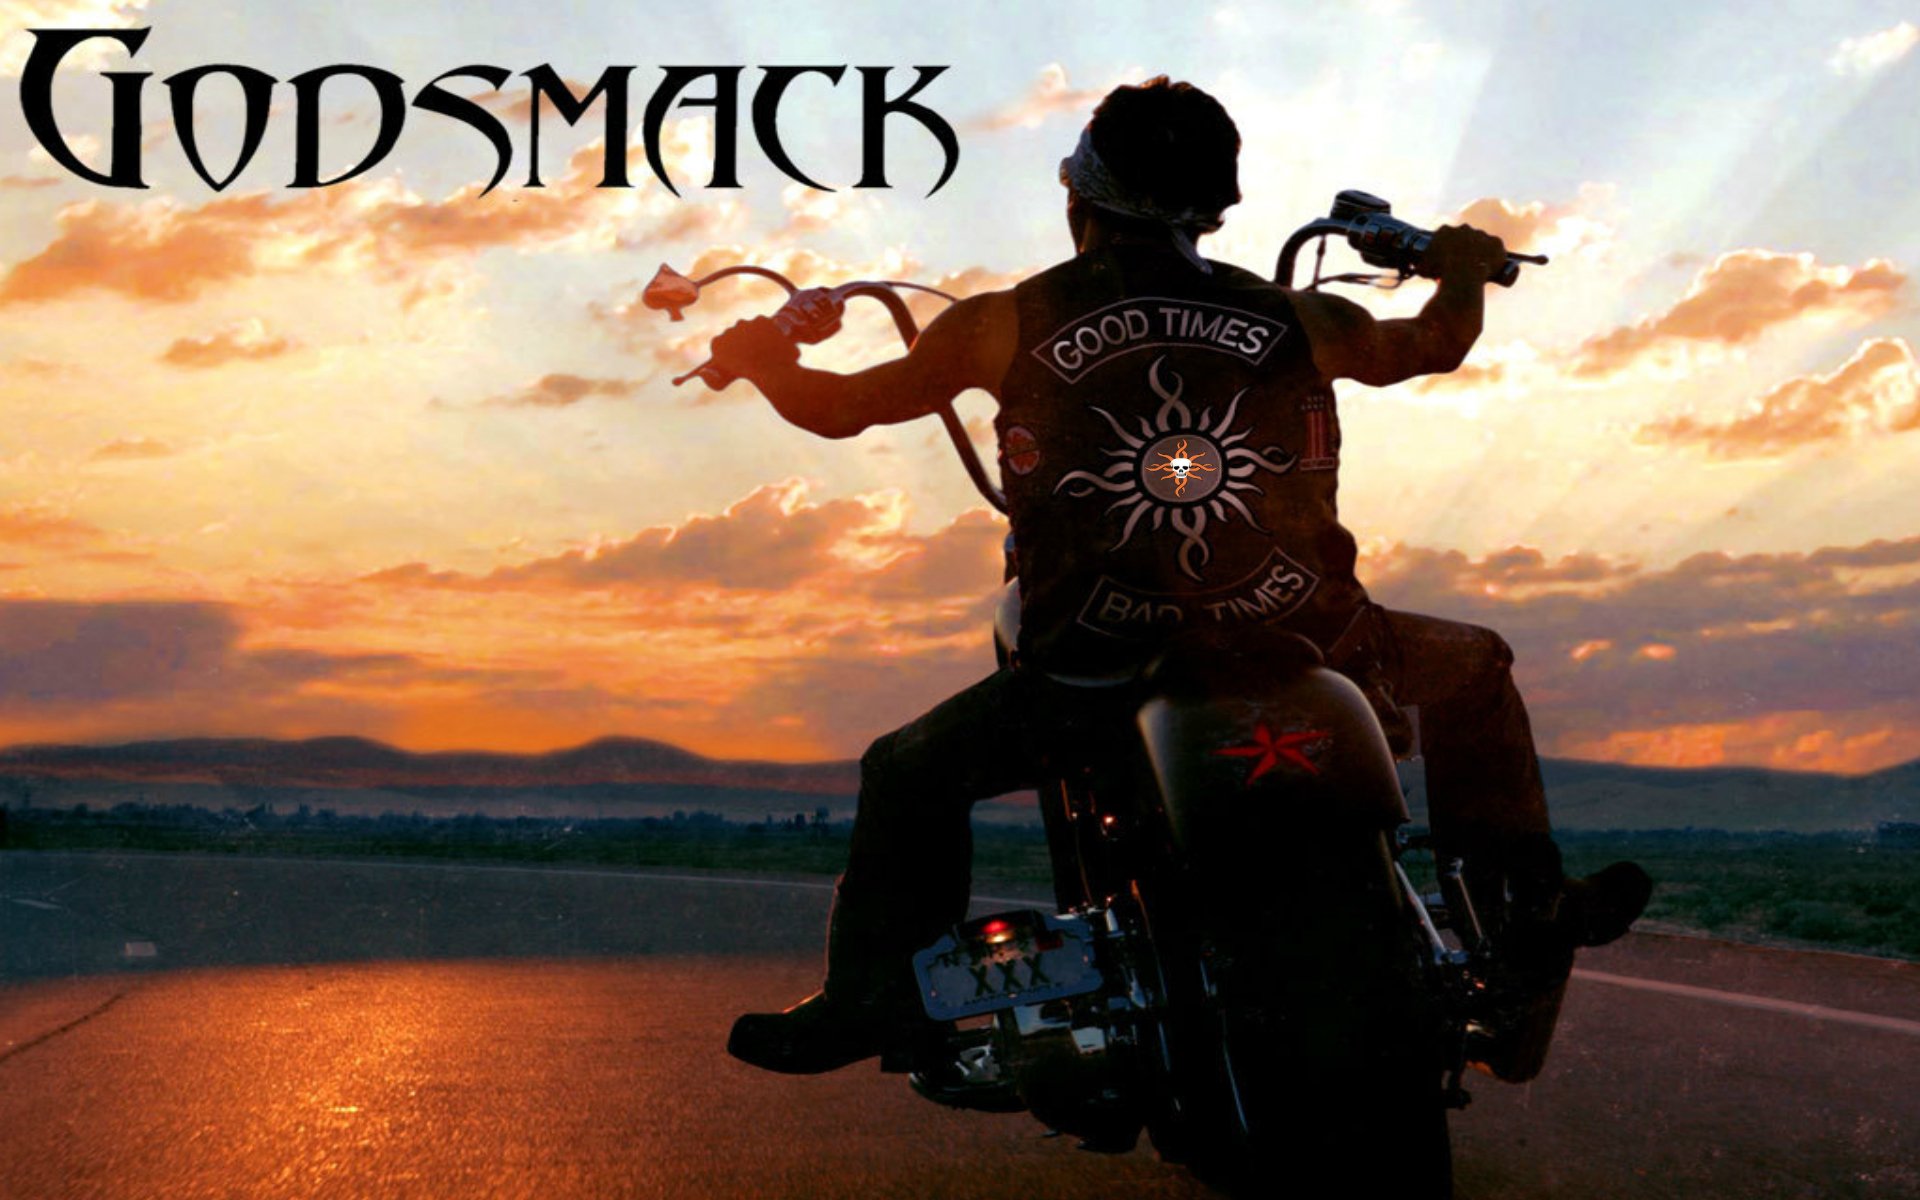 10 Godsmack HD Wallpapers and Backgrounds